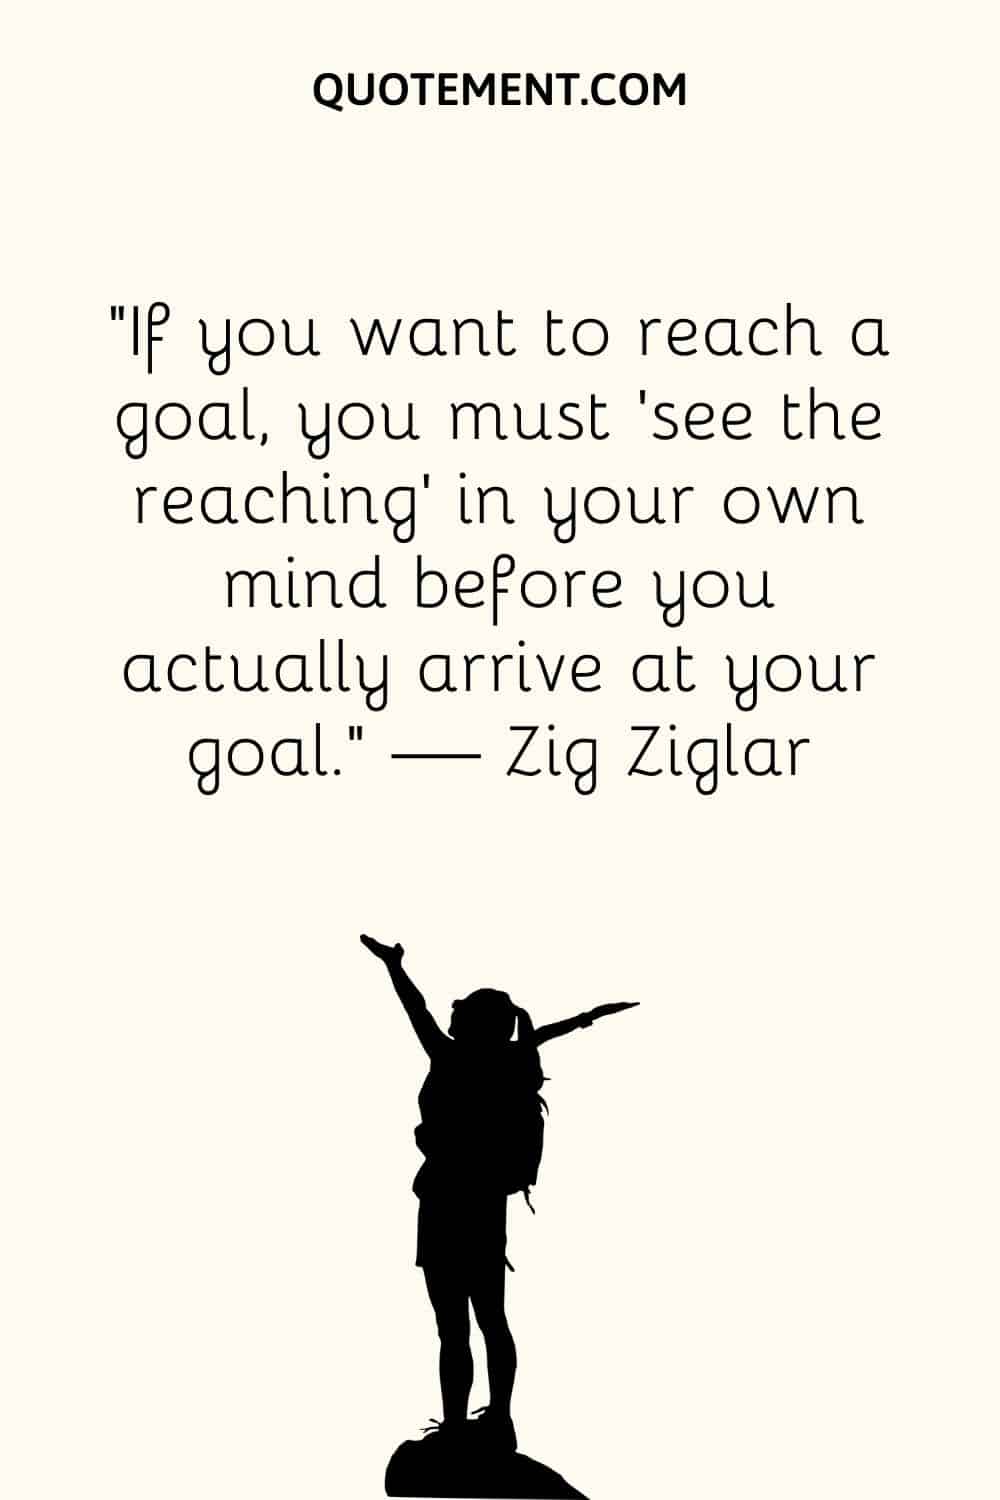 If you want to reach a goal, you must 'see the reaching' in your own mind before you actually arrive at your goal